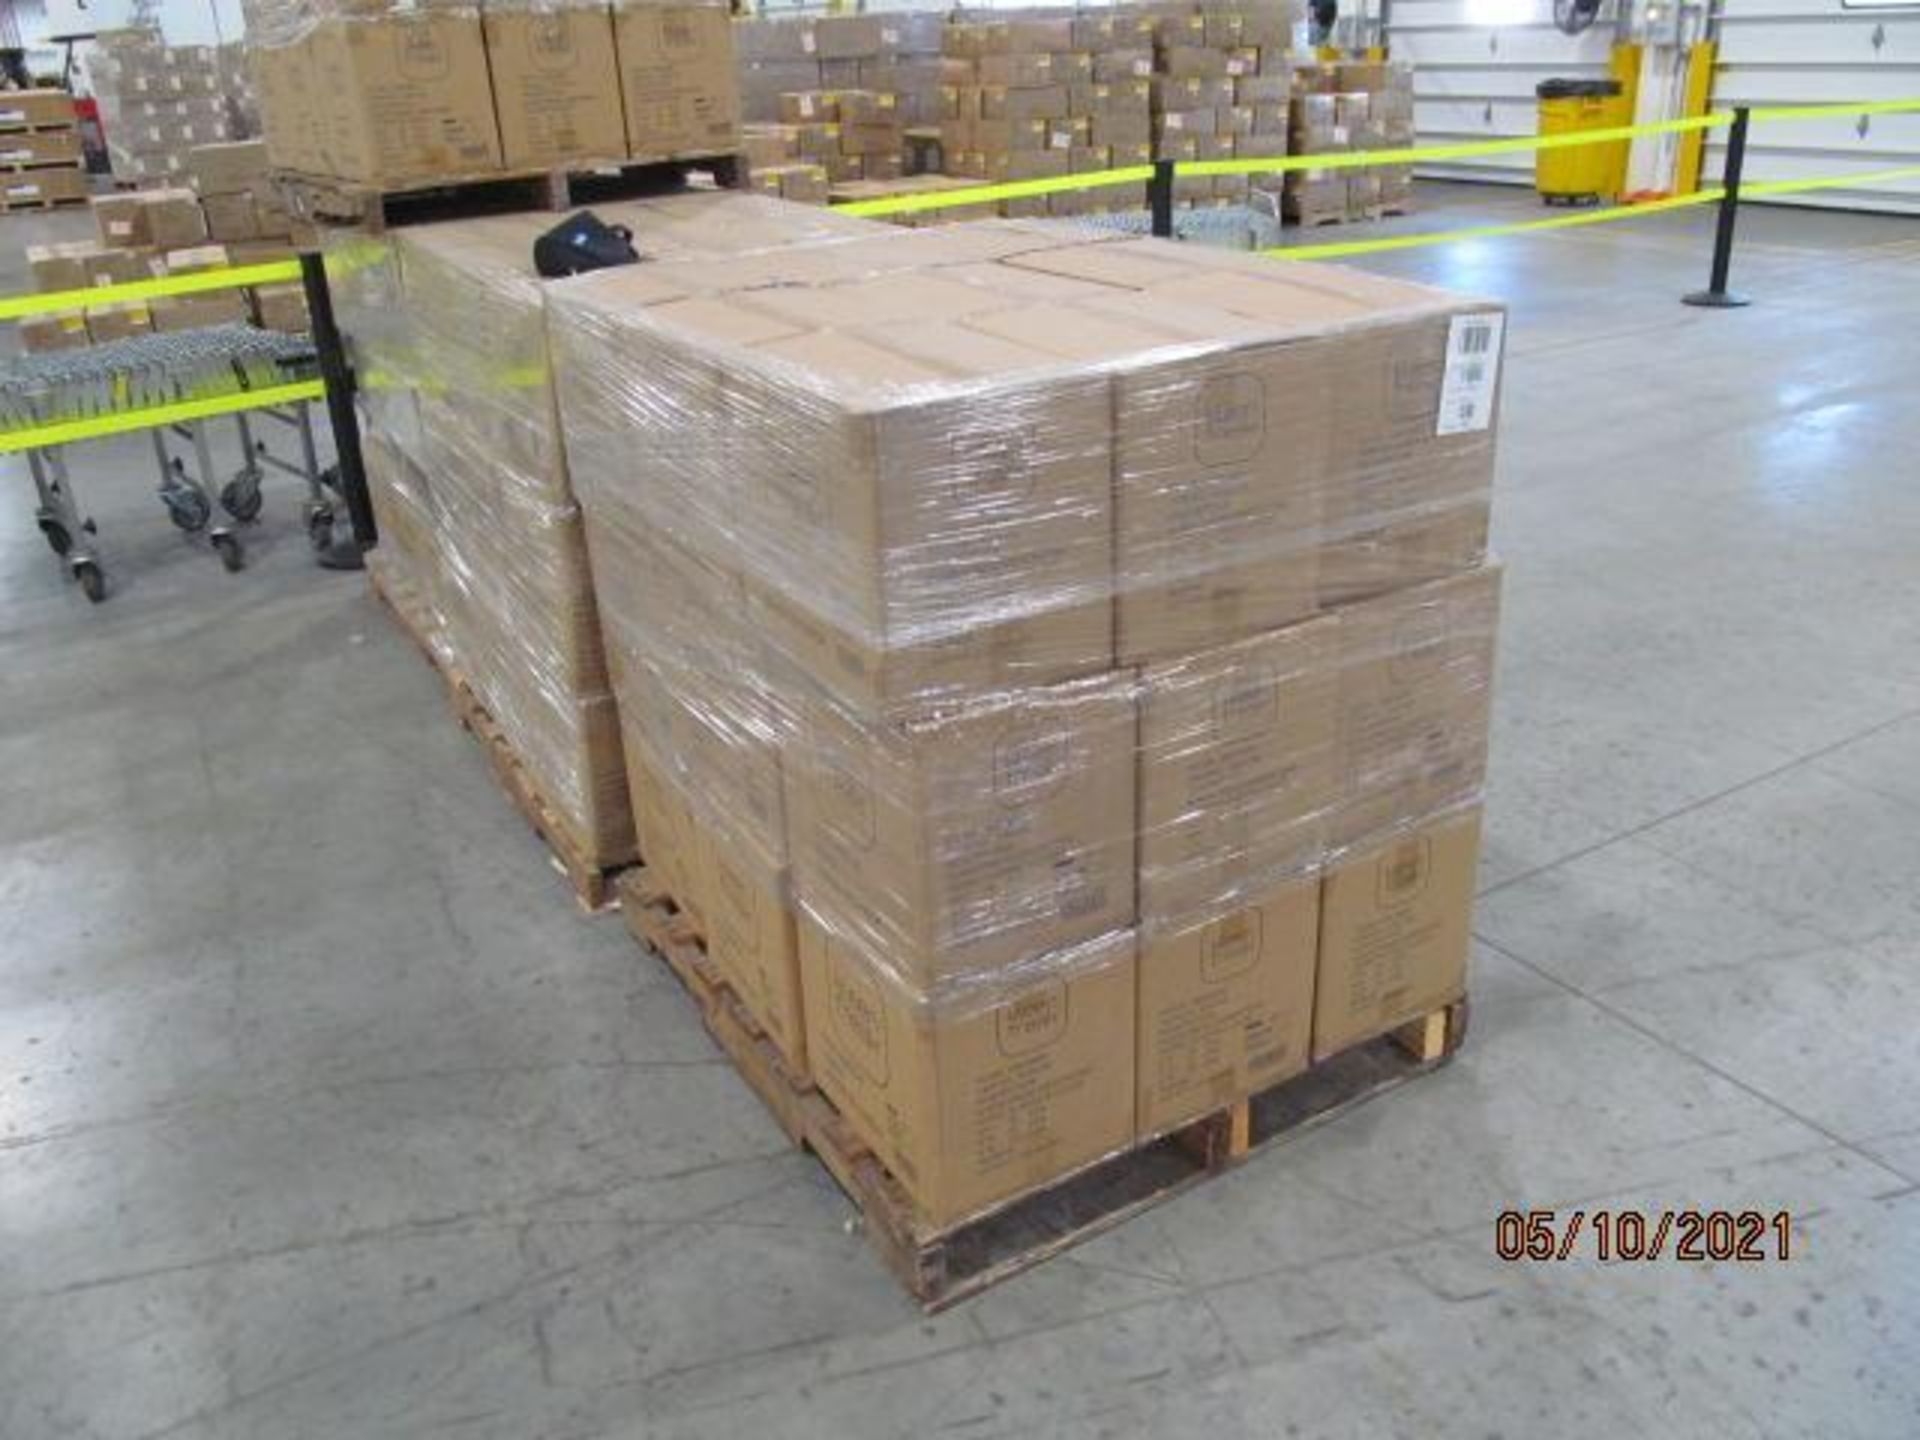 Lot of Waxman Kleen Freak Sanitizing Wipes consisting of 269,568 packages on 416 pallets. Each packa - Image 7 of 11